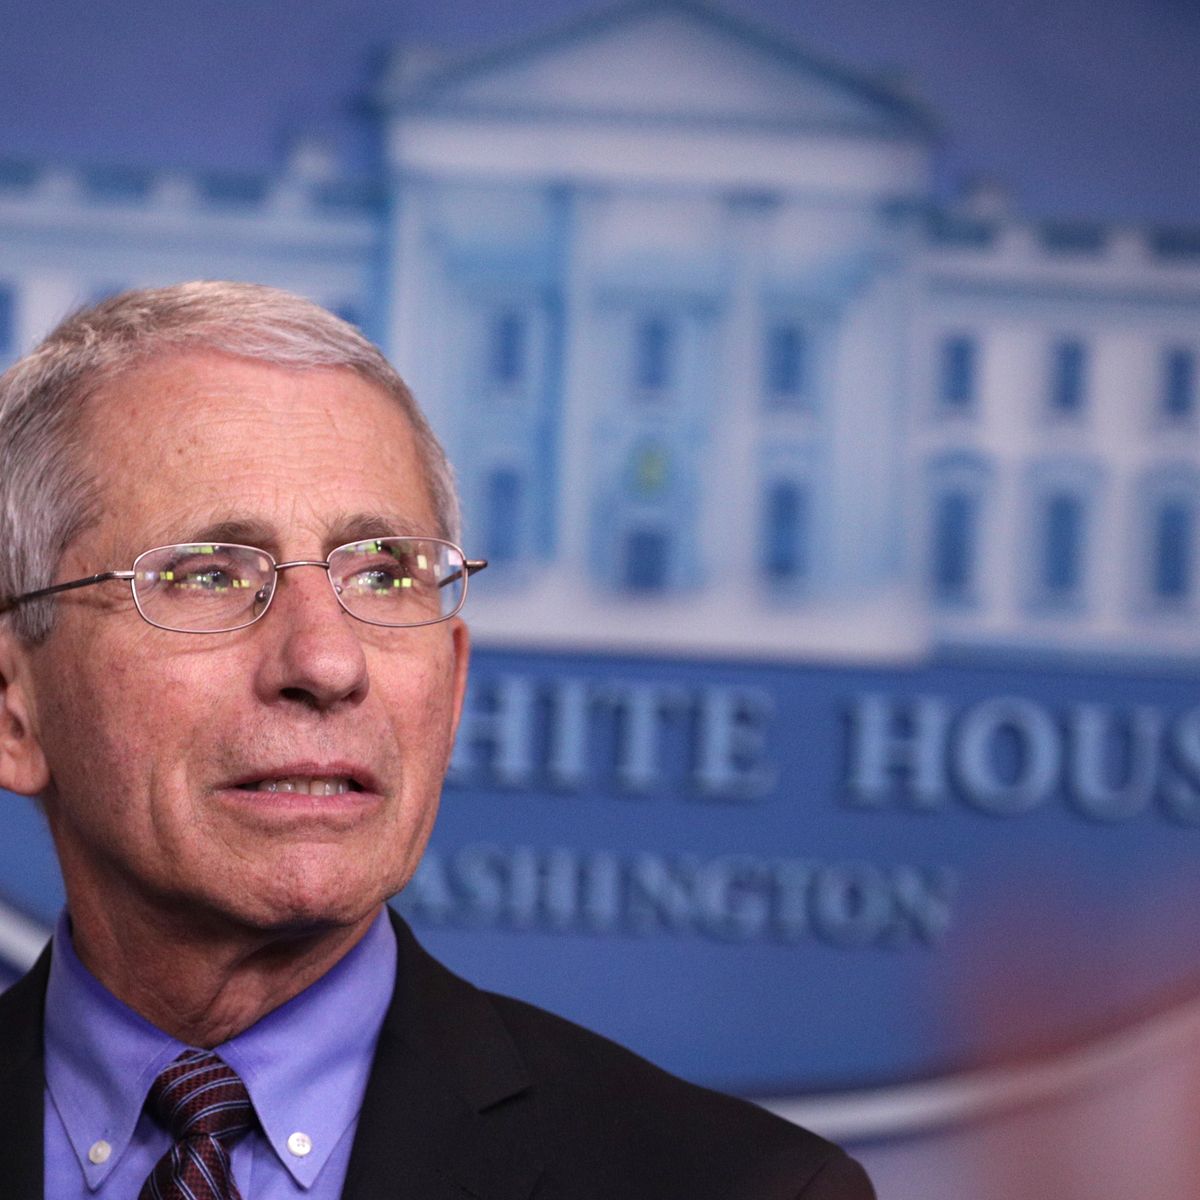 Fauci claims that the economy could start reopening in May